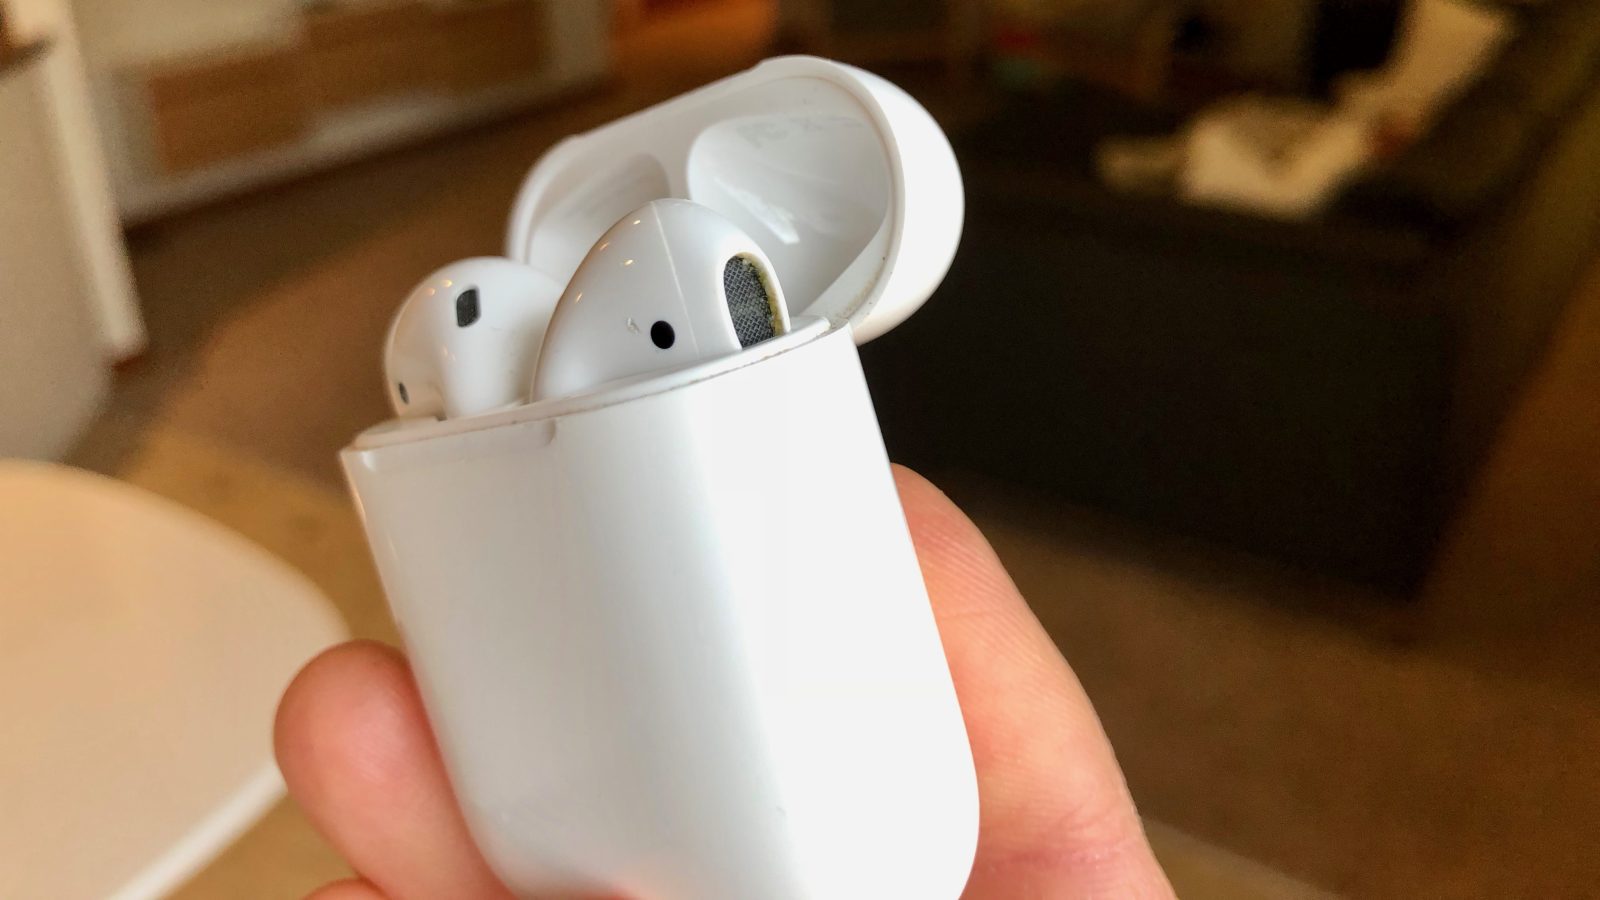 How to clean AirPods and the charging case